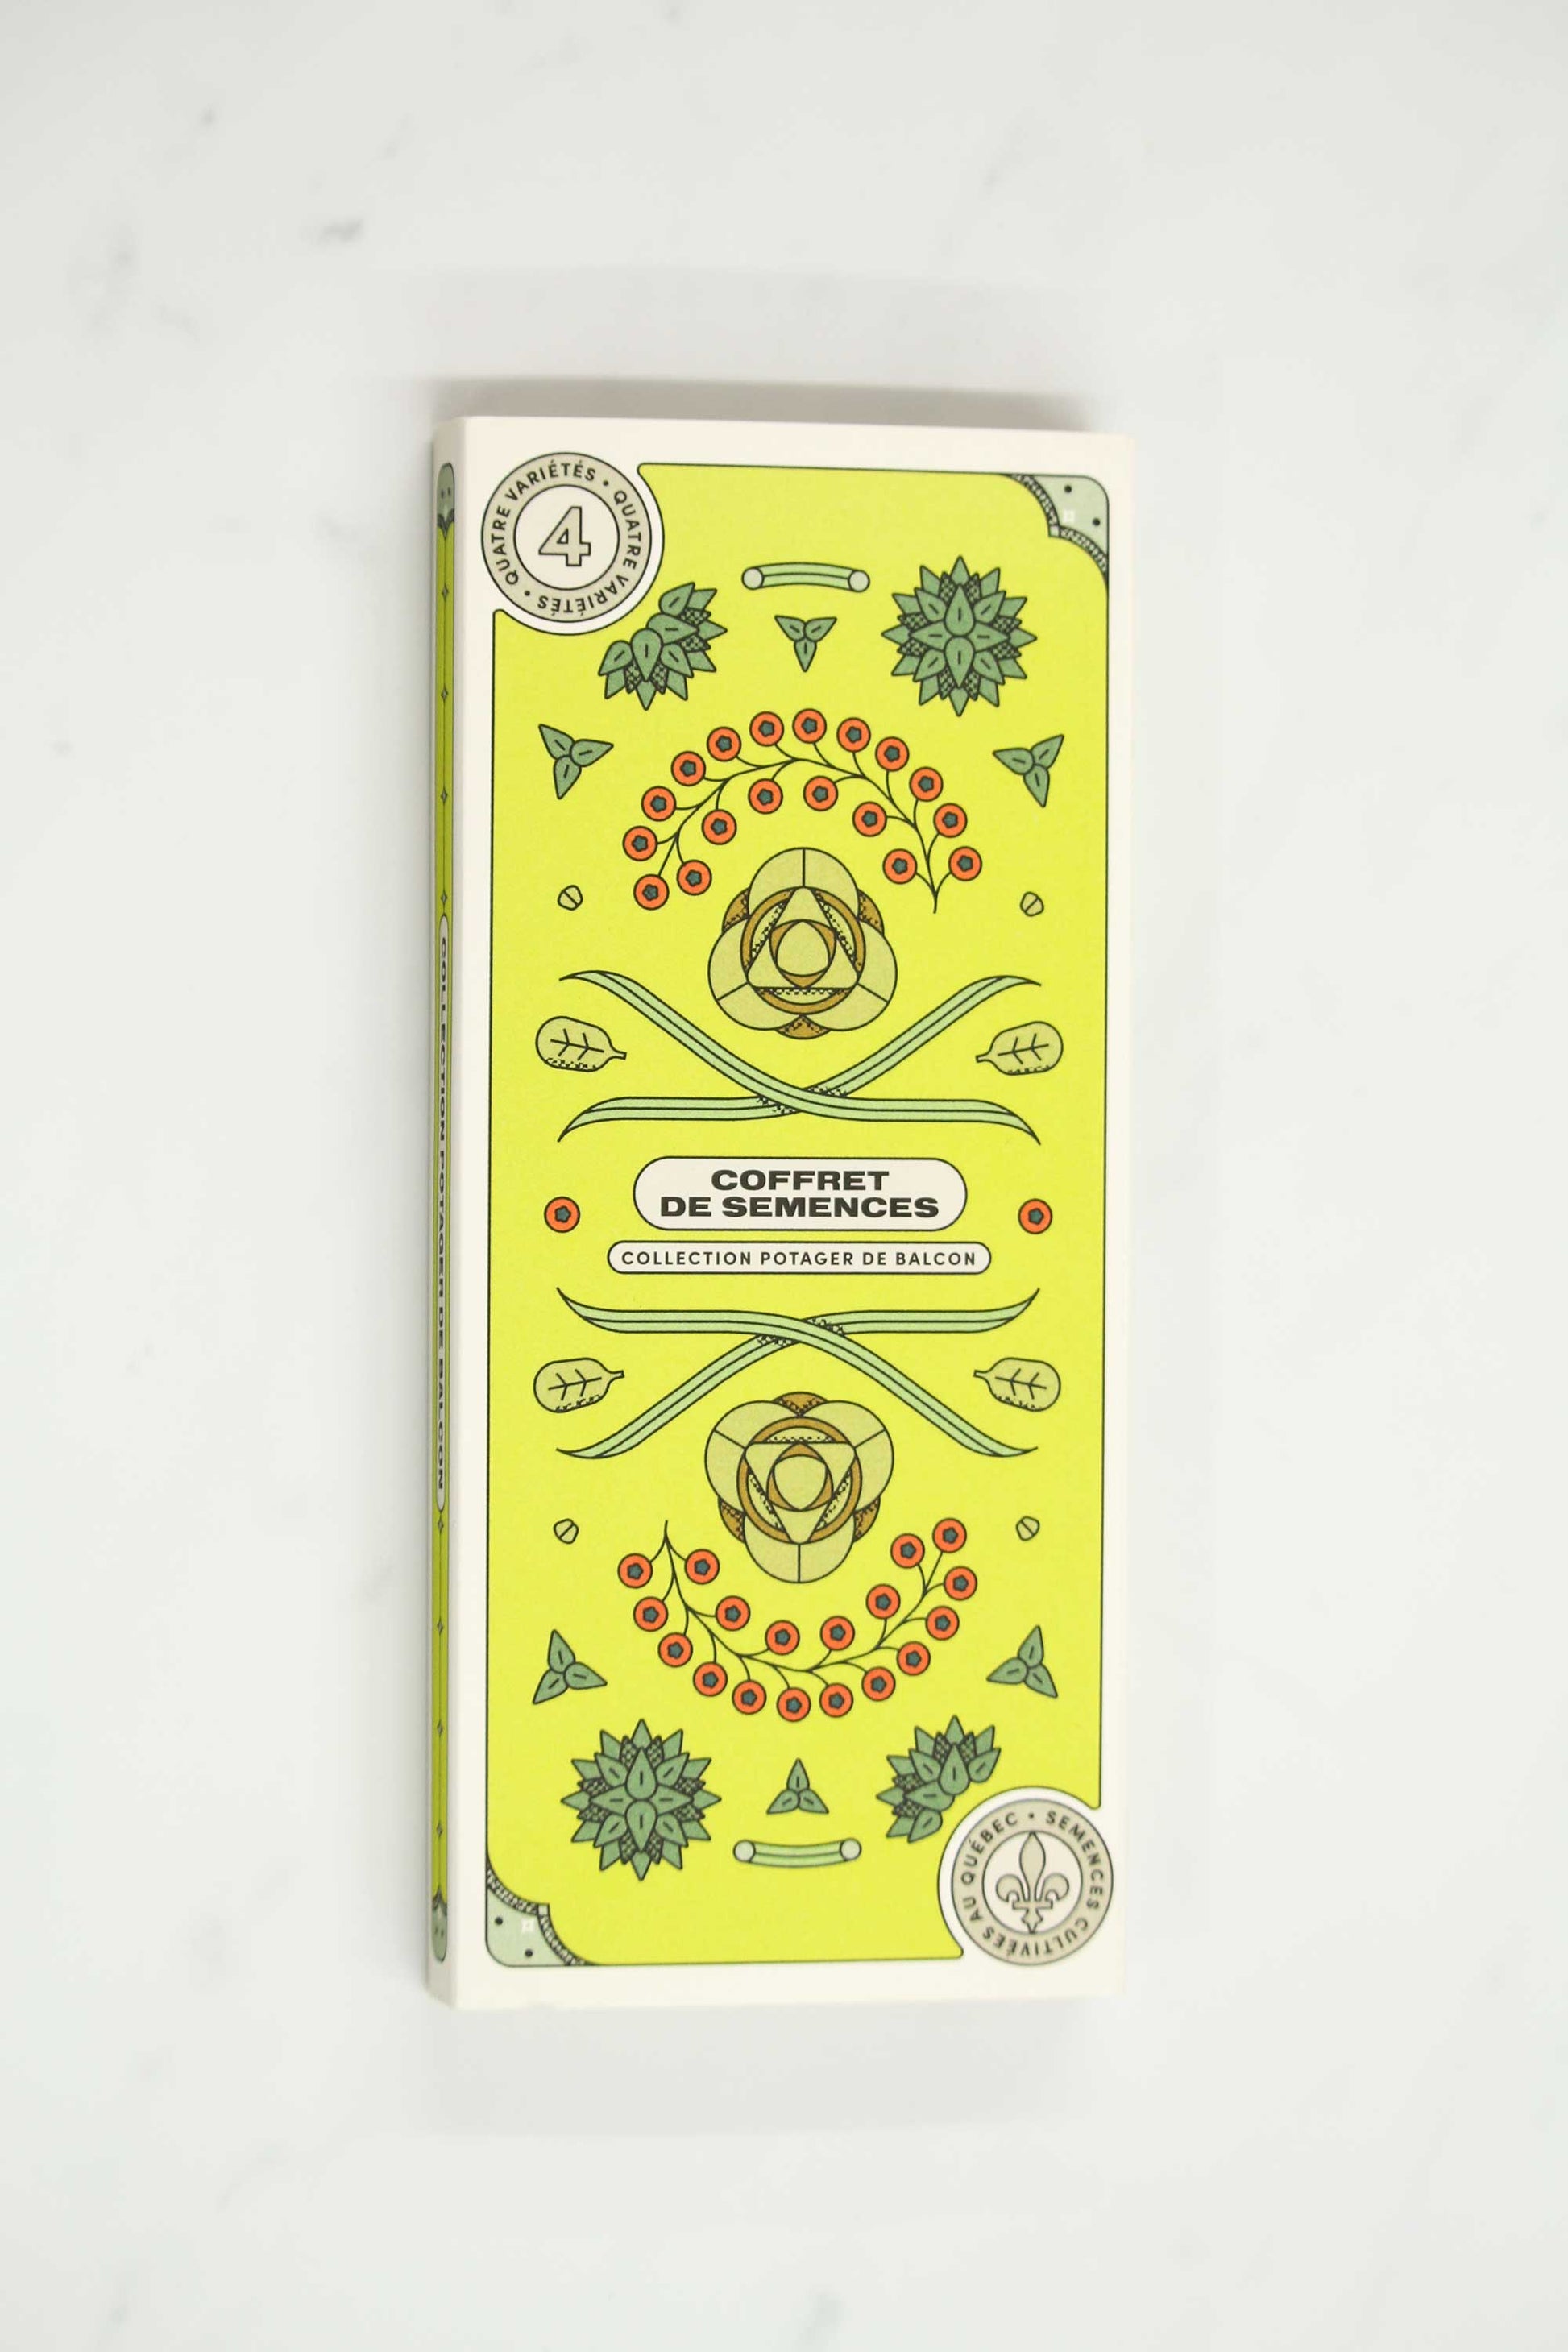 Open Balcony Garden seed collection box set with illustrations of basil, green beans, lettuce and tomatoes on cover